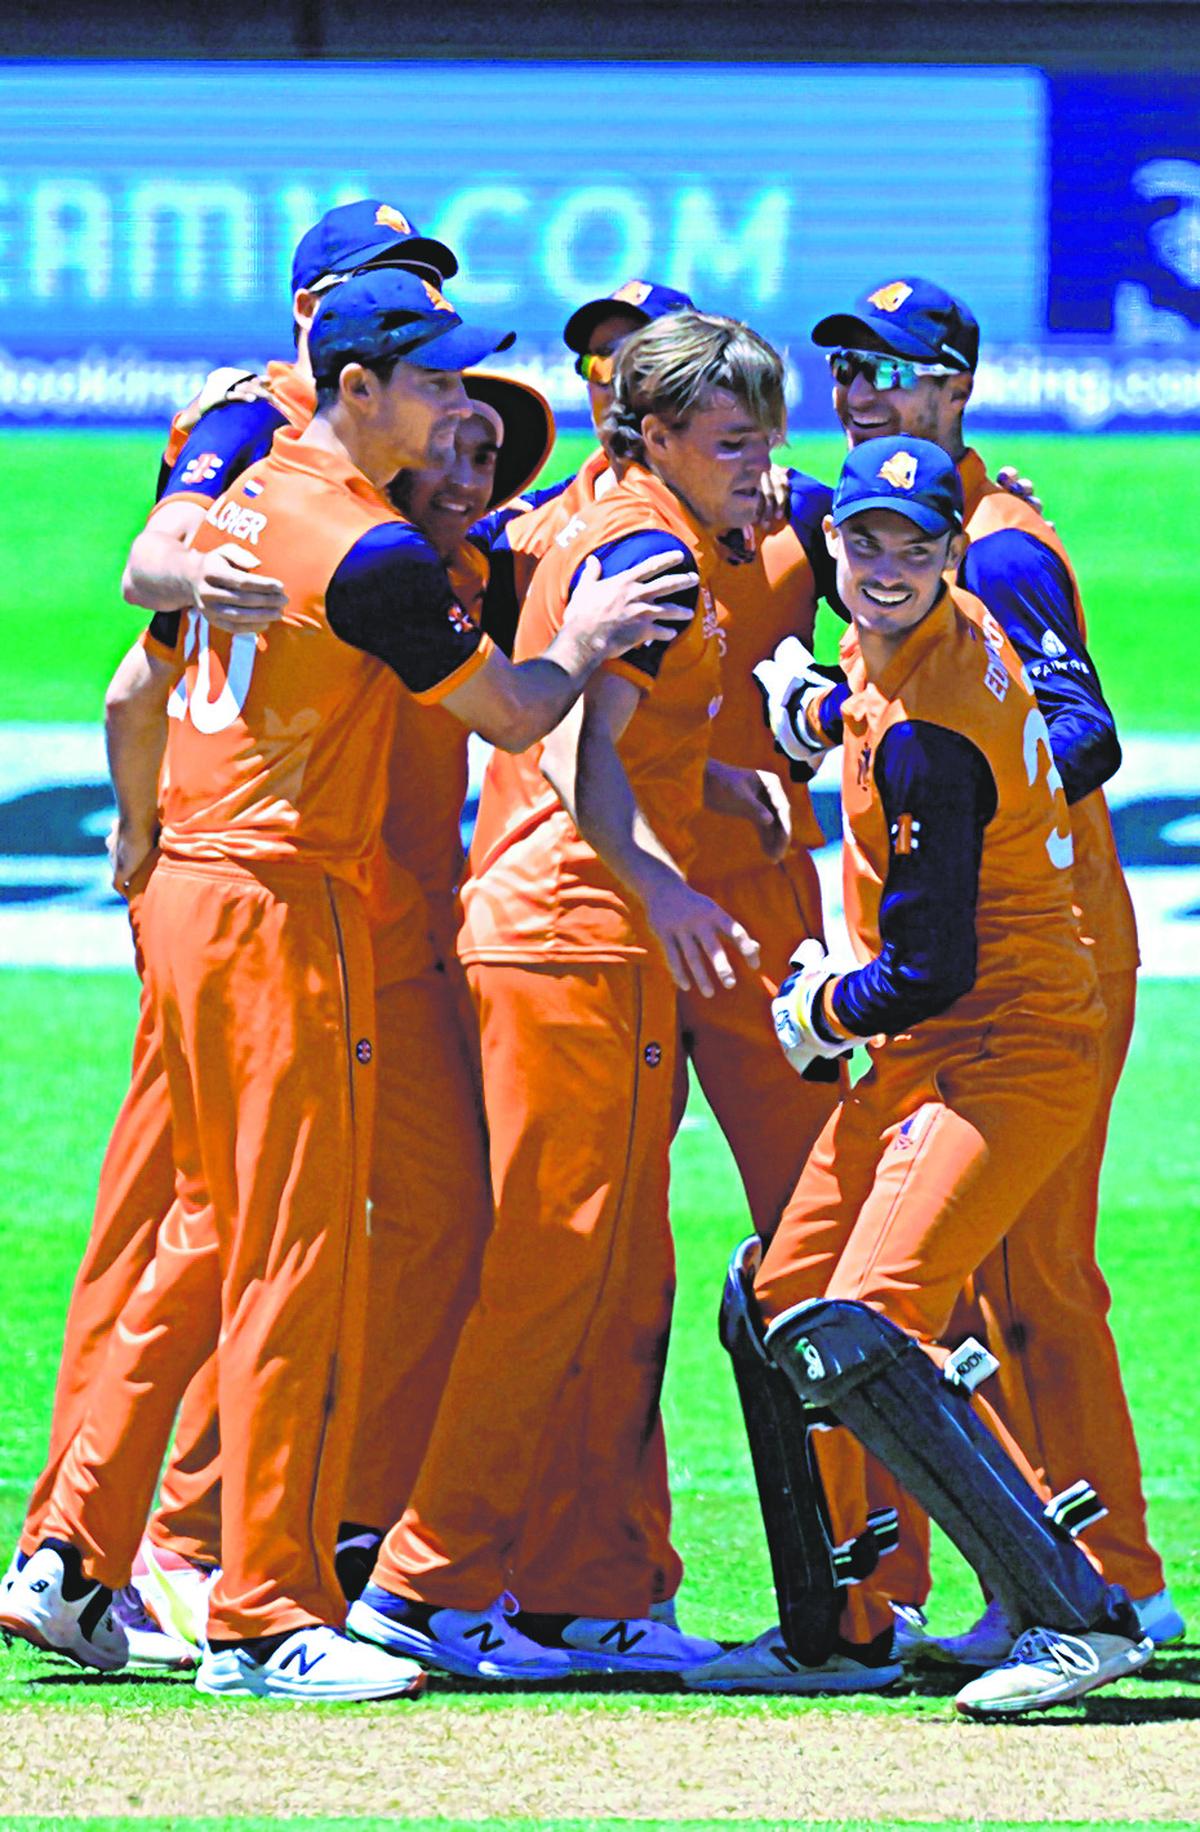 Netherlands’ players celebrate their win during the ICC men’s Twenty20 World Cup 2022 cricket match against South Africa at Adelaide Oval on November 6, 2022.